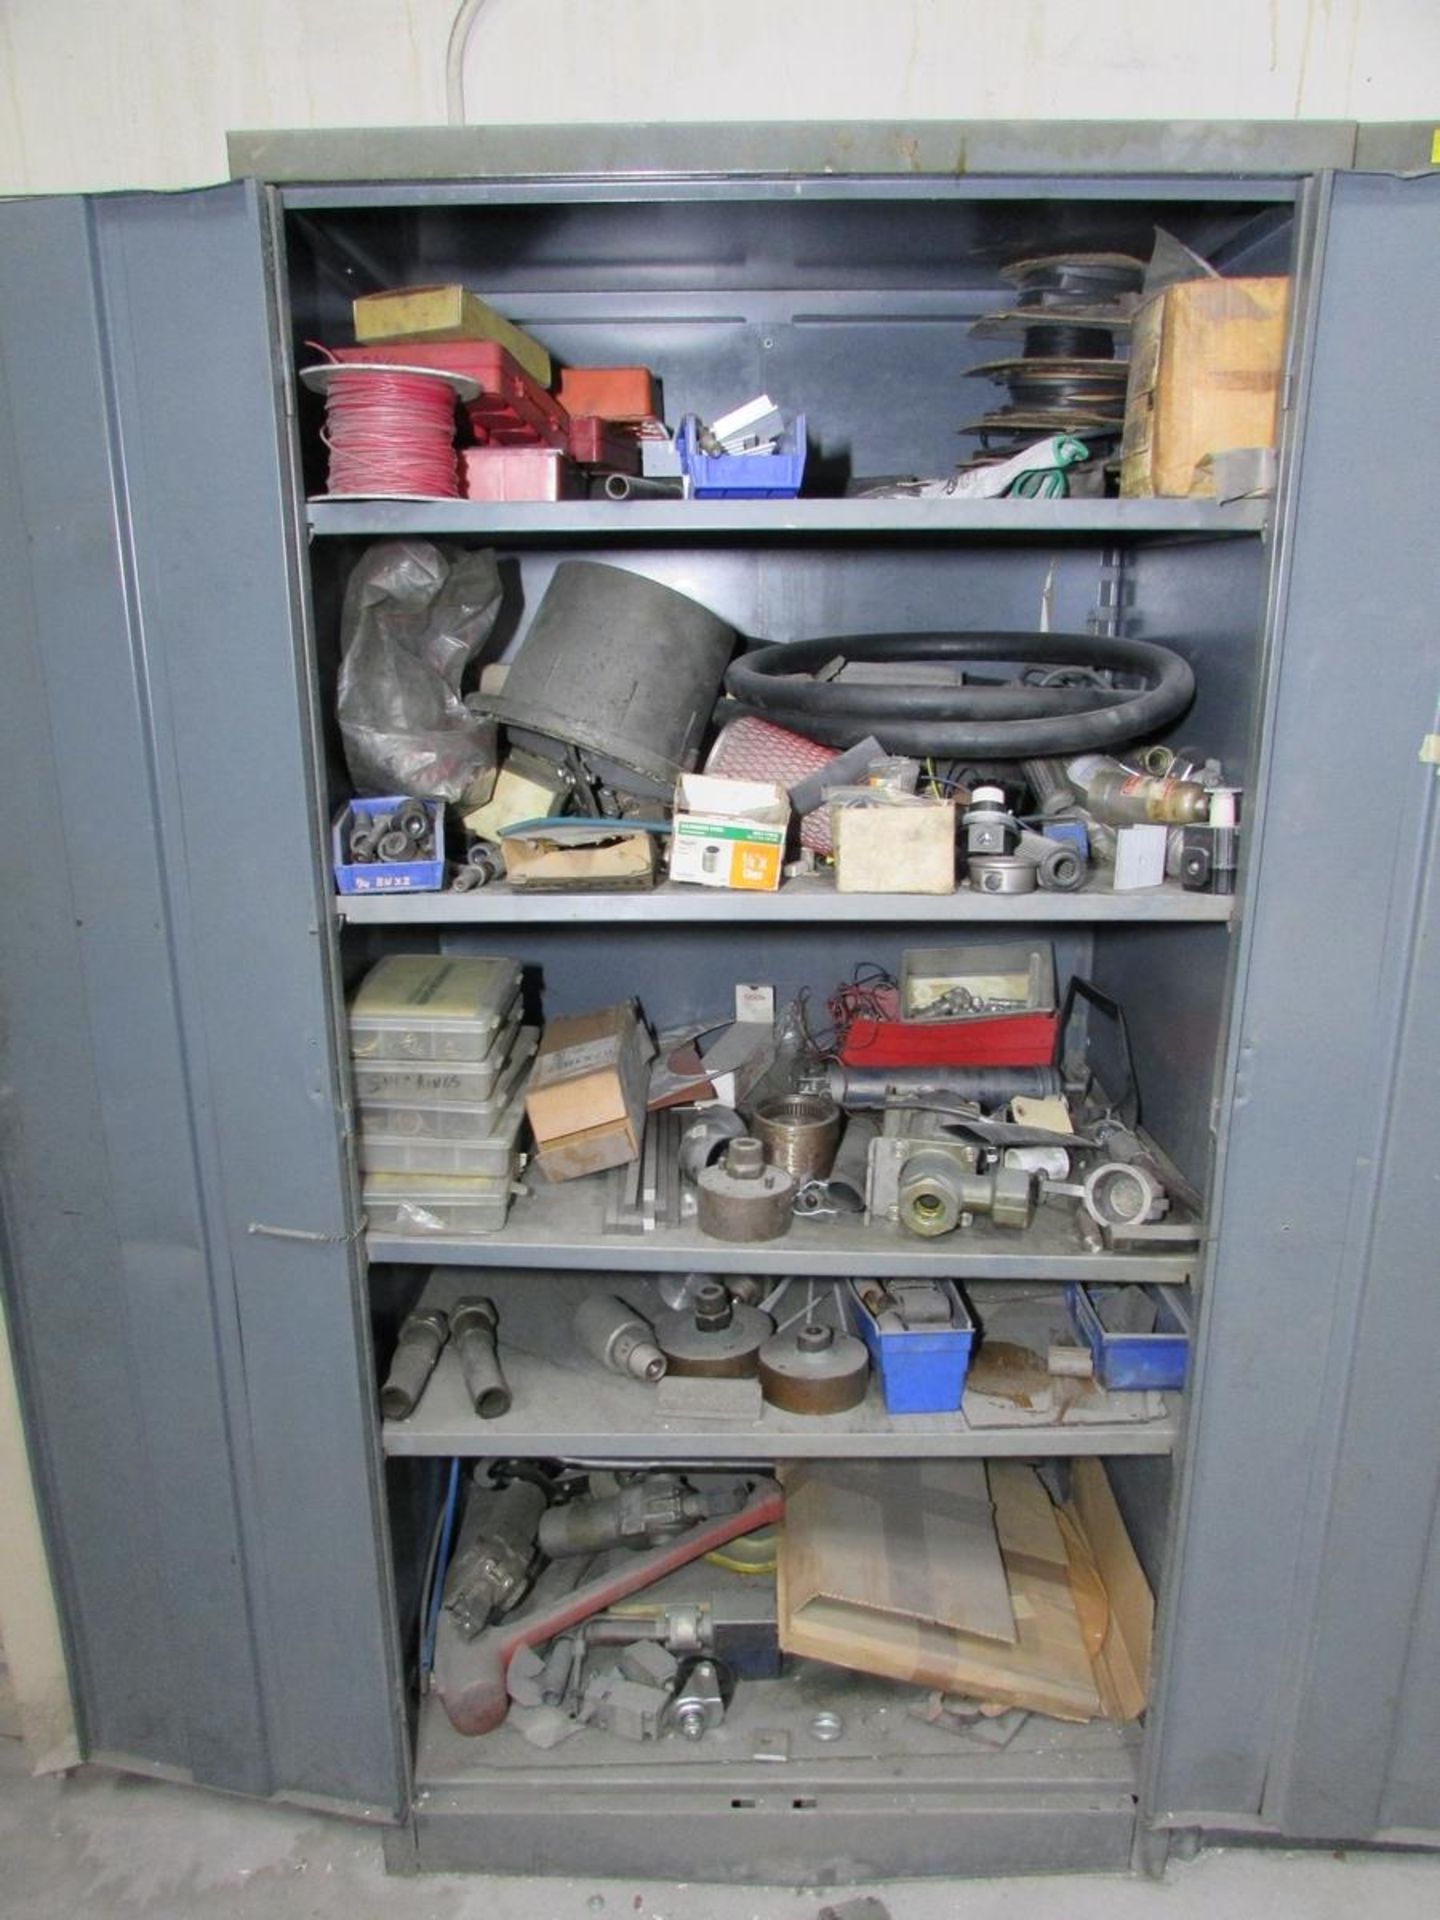 LOT - (3) 2-DOOR CABINETS, W/ CONTENTS: ASSORTED PARTS, FUSES, HARDWARE, ETC. - Image 5 of 10